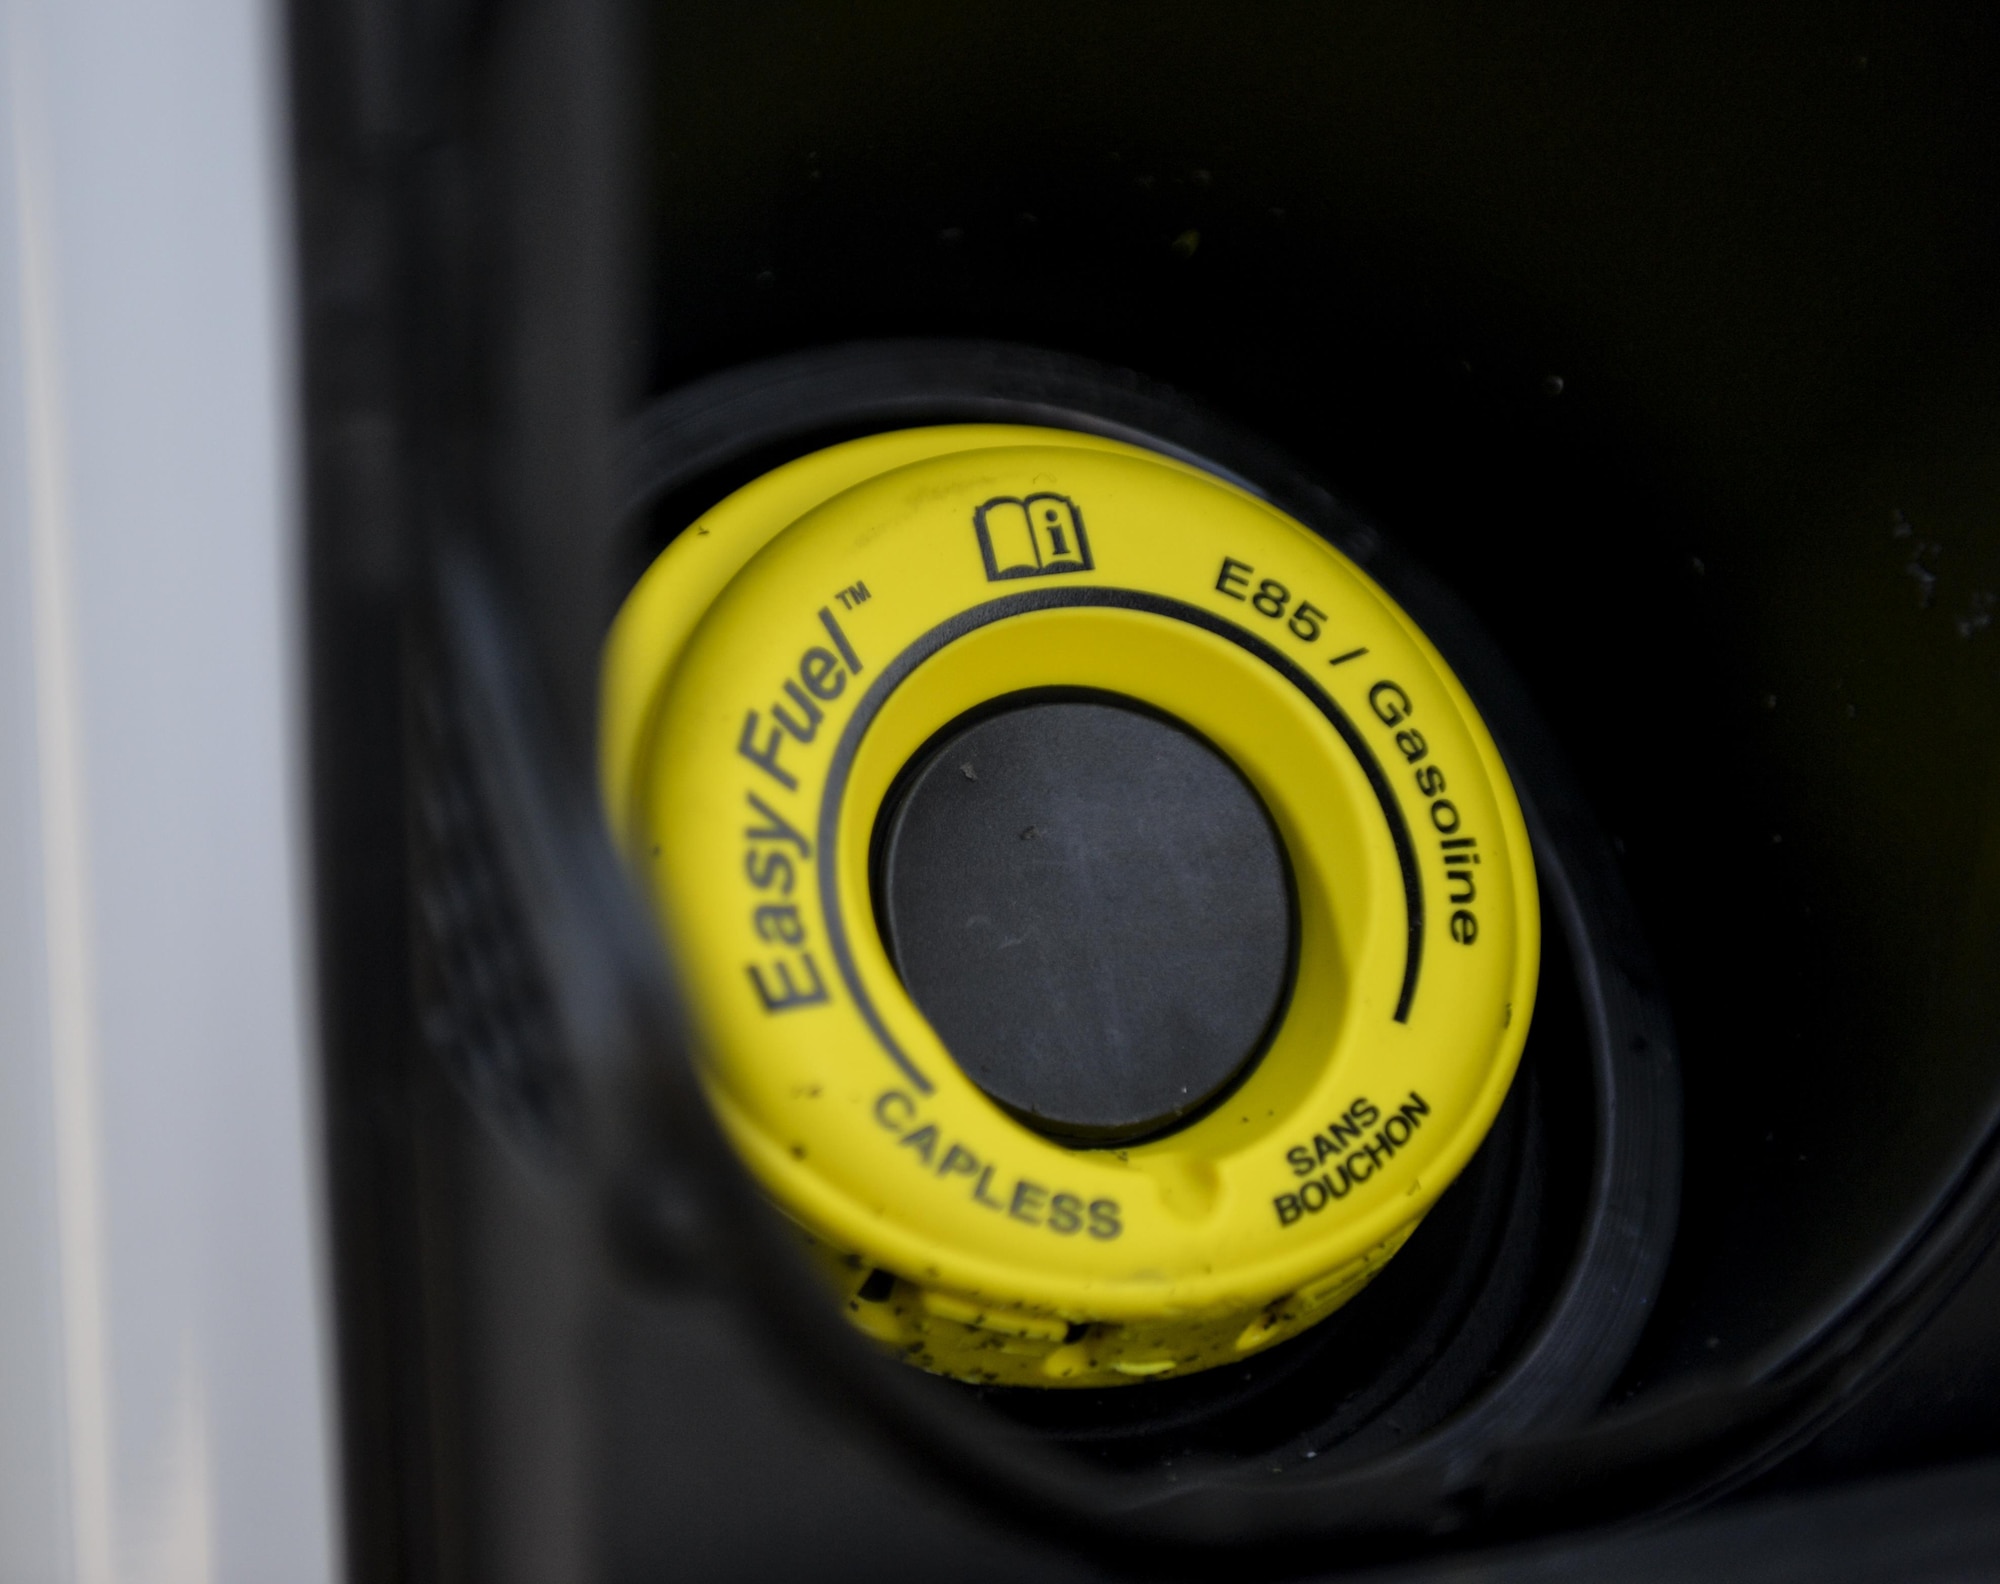 A yellow gas cap is on new vehicles recently received by the 2nd Logistics Readiness Squadron vehicle management flight at Barksdale Air Force Base, La., Jan. 11, 2016. The yellow cap is a visible indicator that the car uses flex fuel, which burns less fossil fuel and requires Airmen to use the correct fuel. (U.S. Air Force photo/Airman 1st Class Mozer O. Da Cunha) 